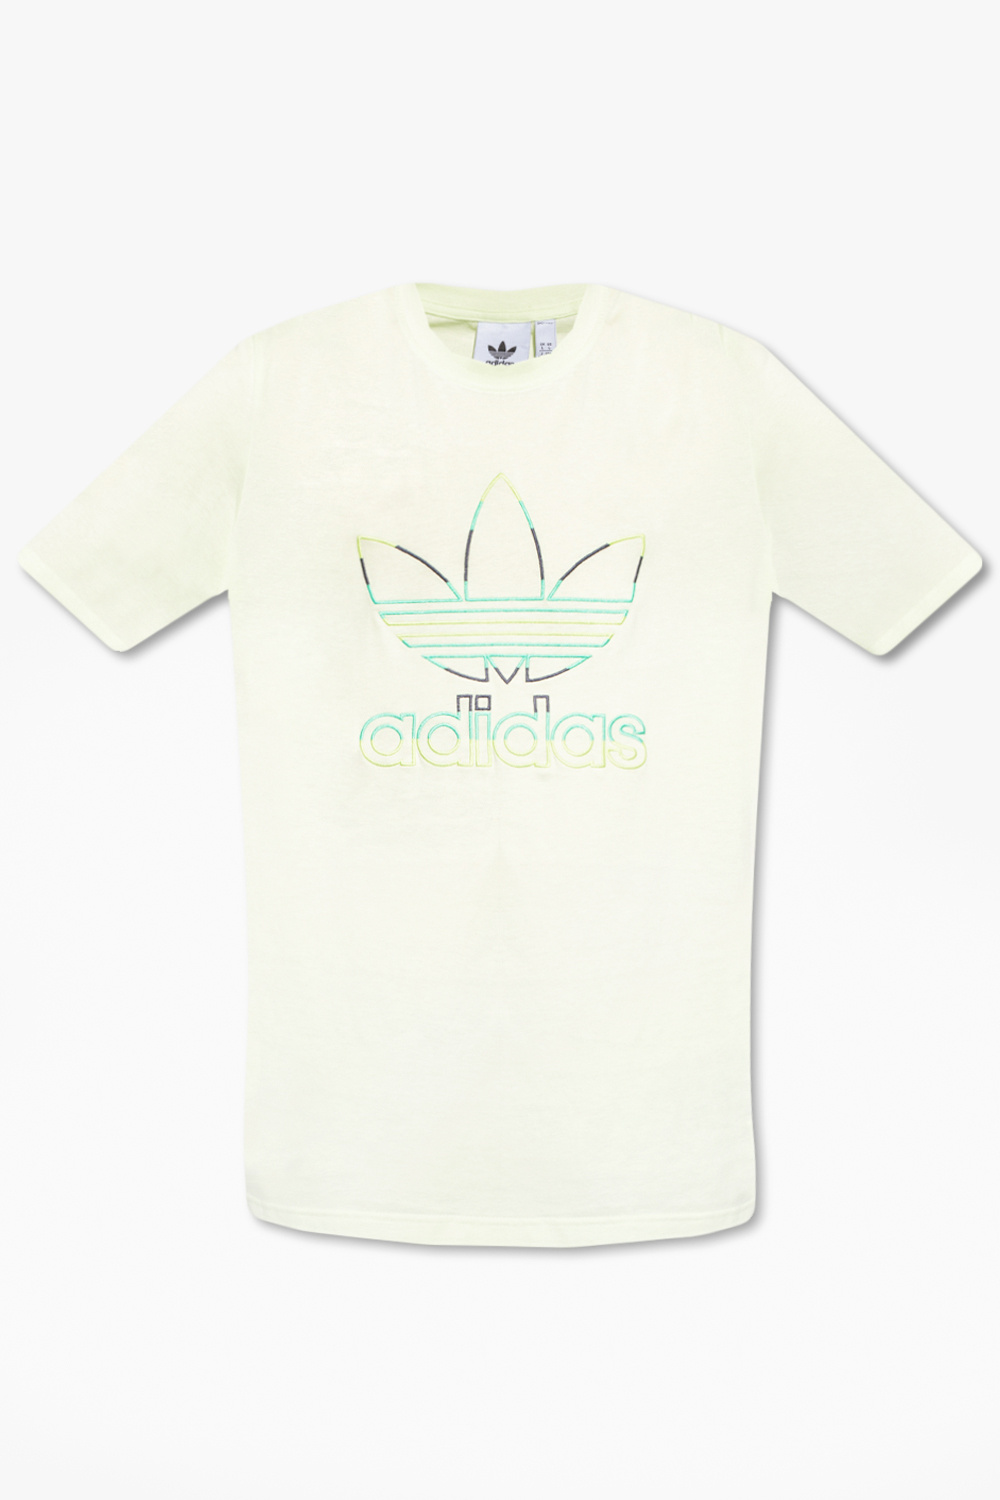 ADIDAS Originals adidas champion collab shoes clearance outlet